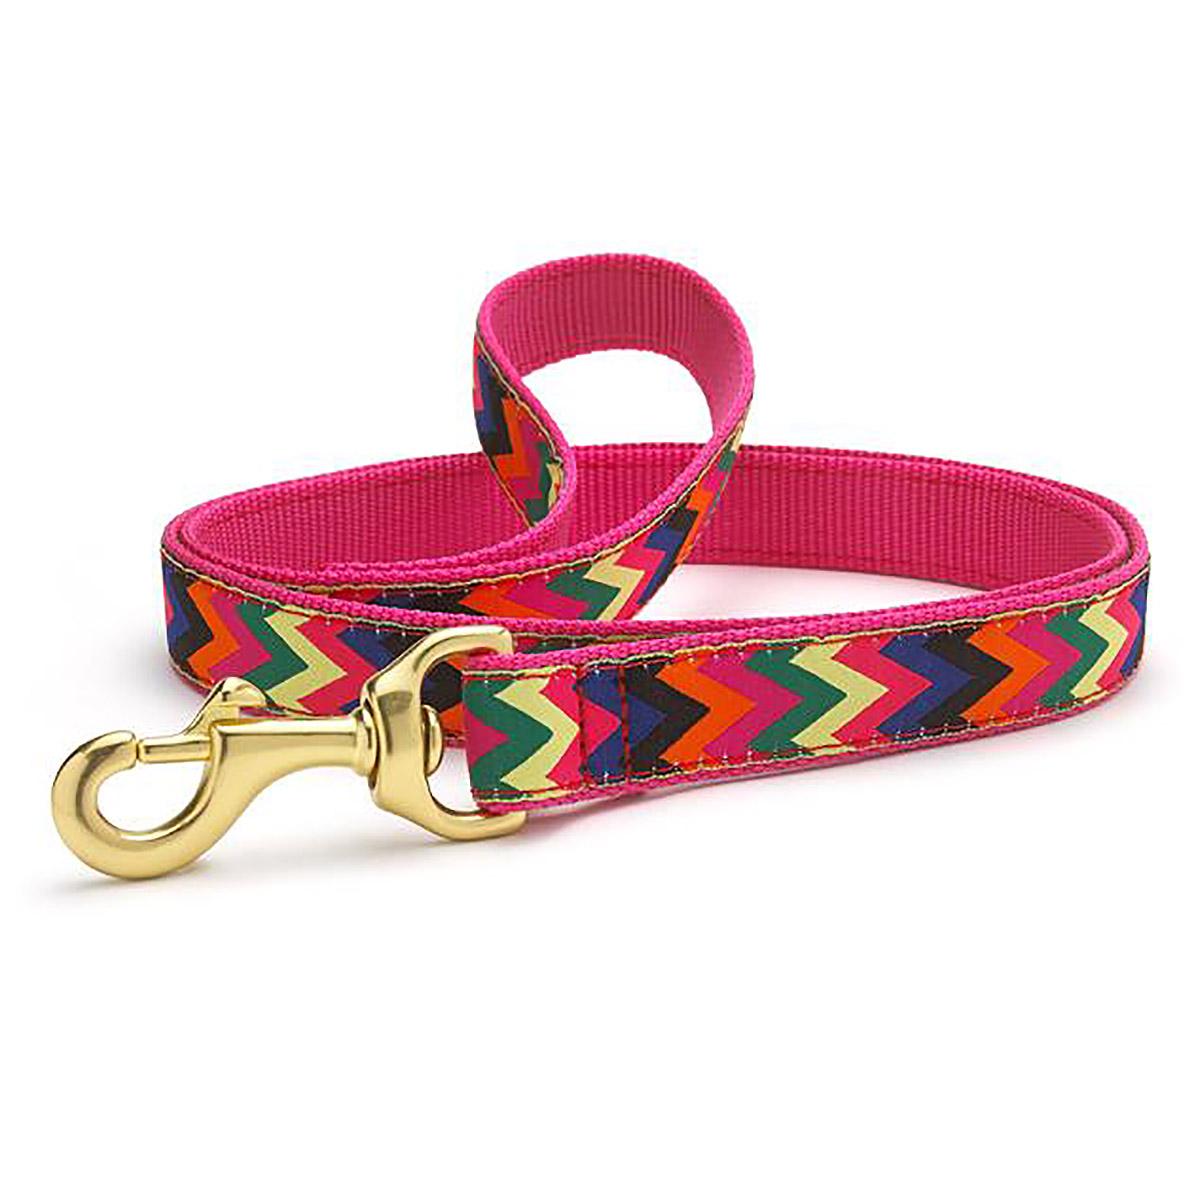 Zig Zag Wag Dog Leash by Up Country